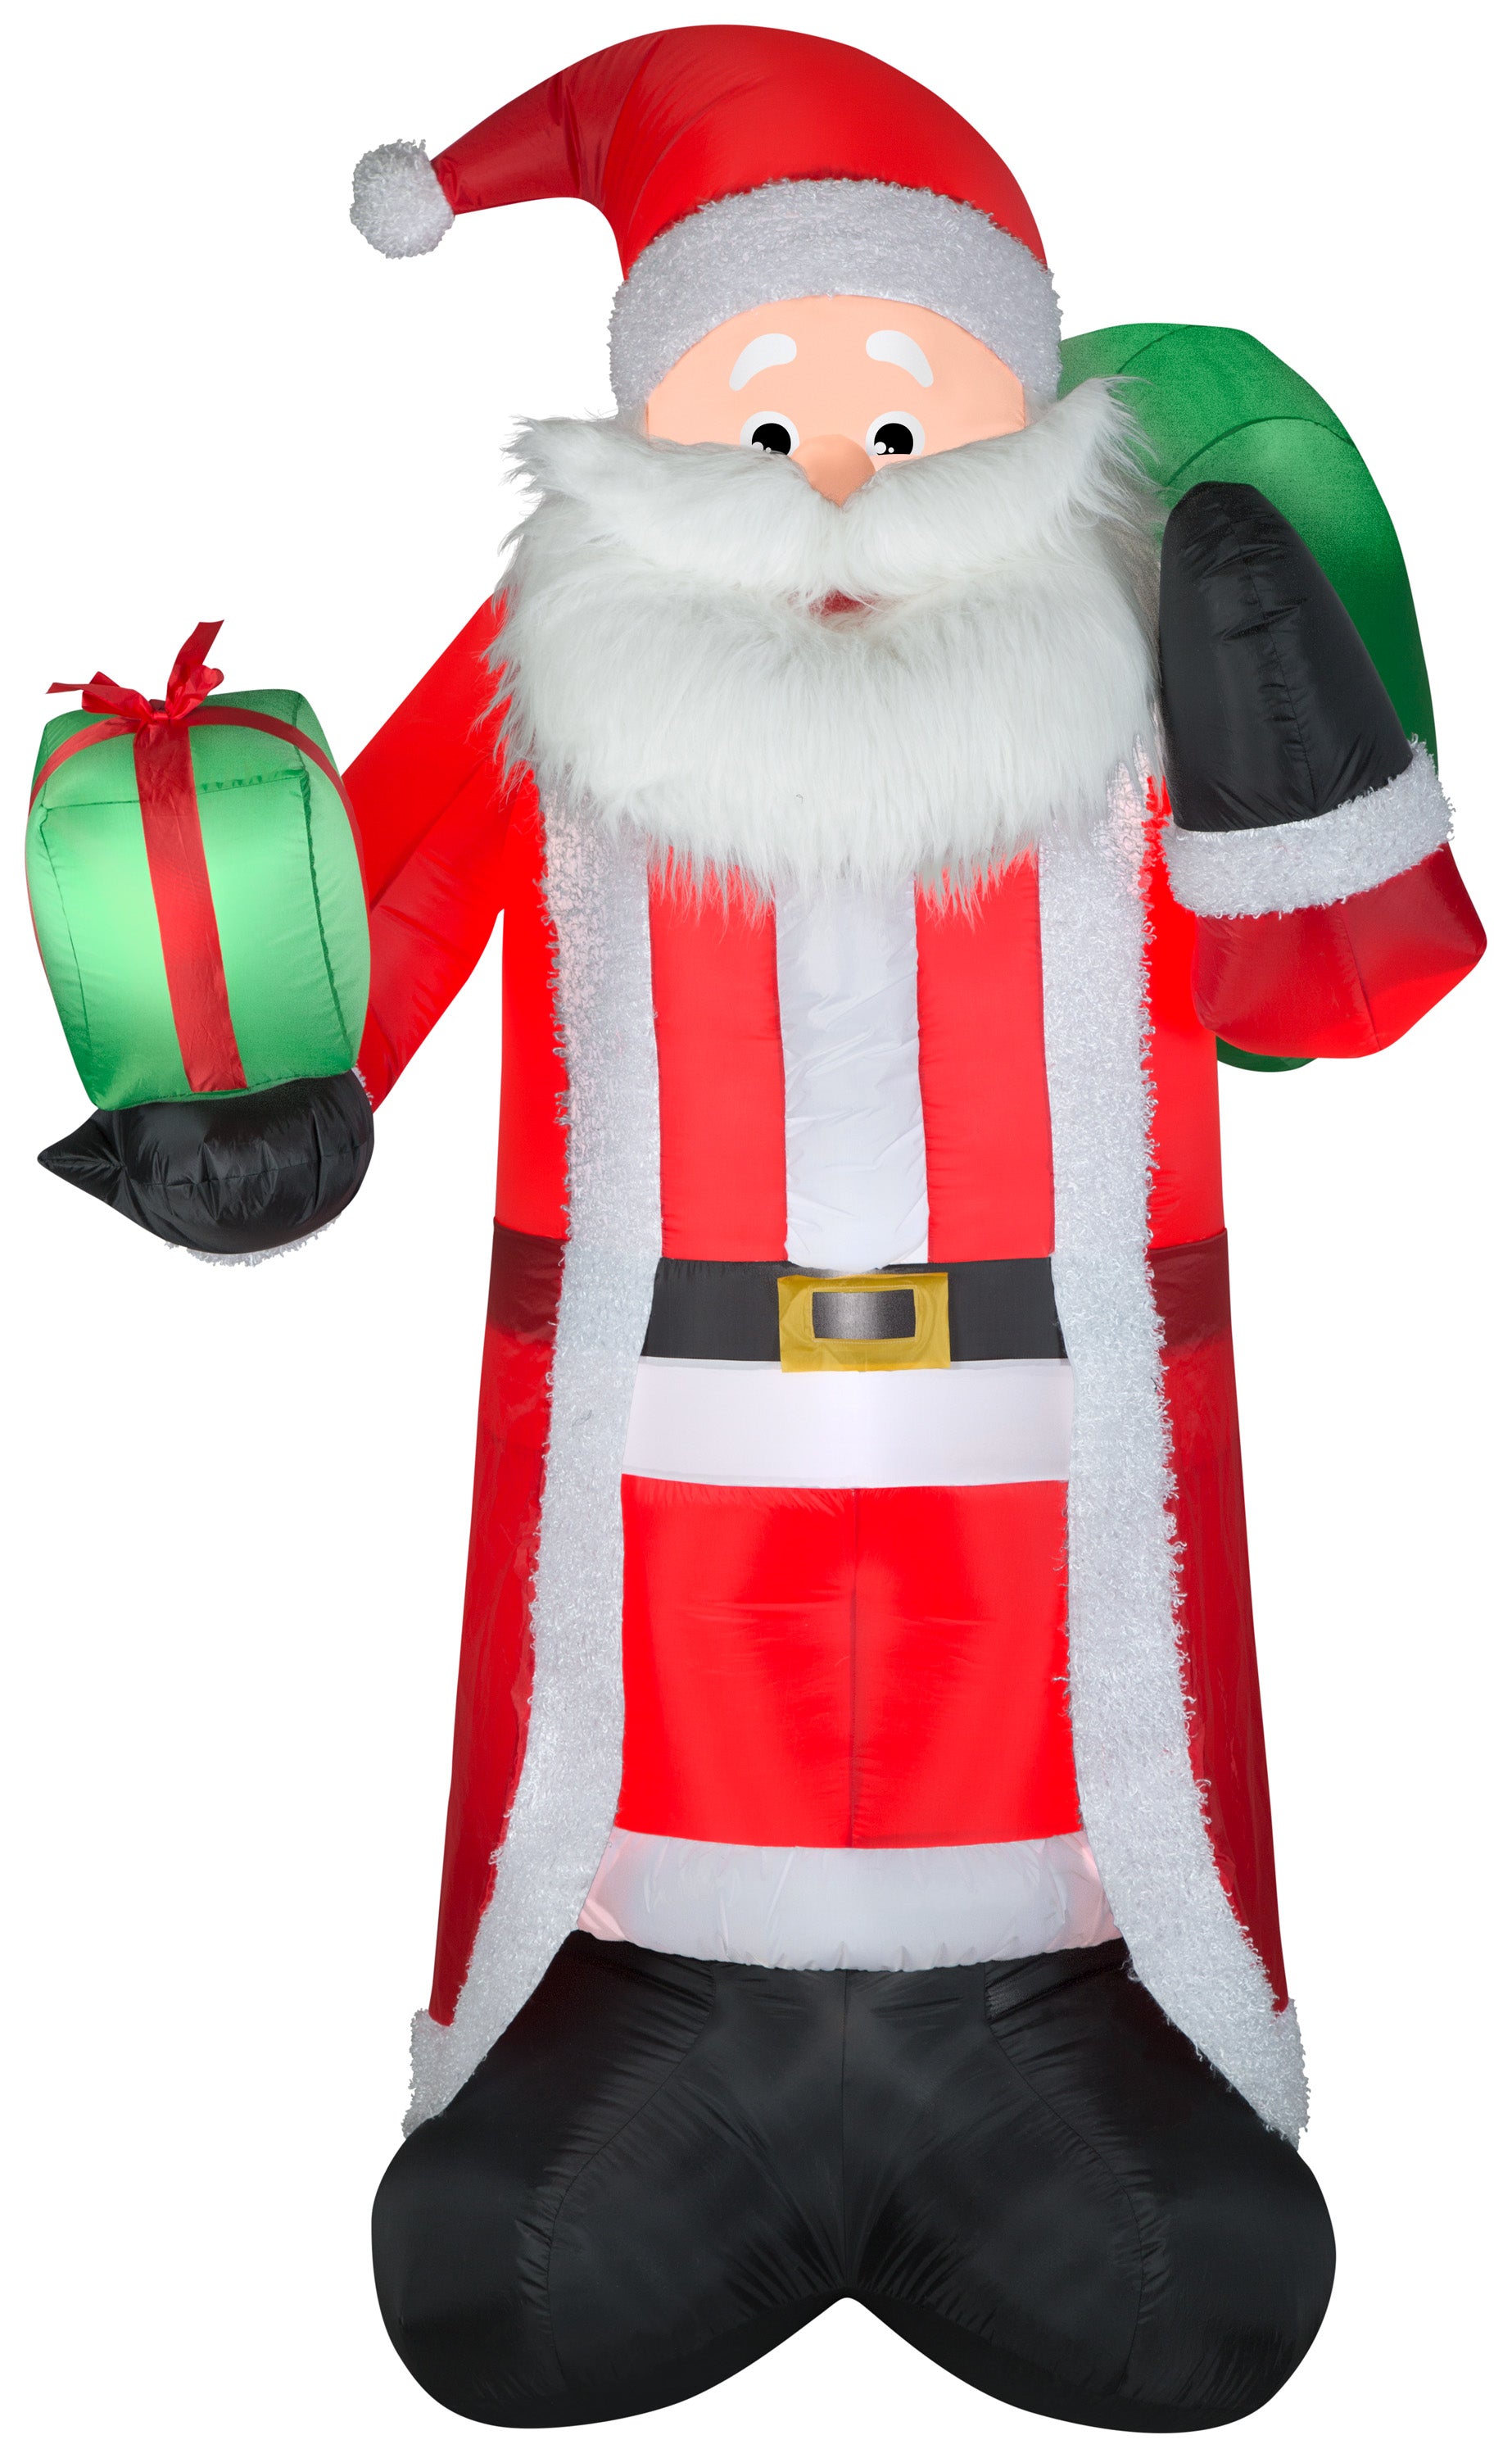 Gemmy Christmas Airblown Inflatable Mixed Media Santa, 8 ft Tall, Multicolored